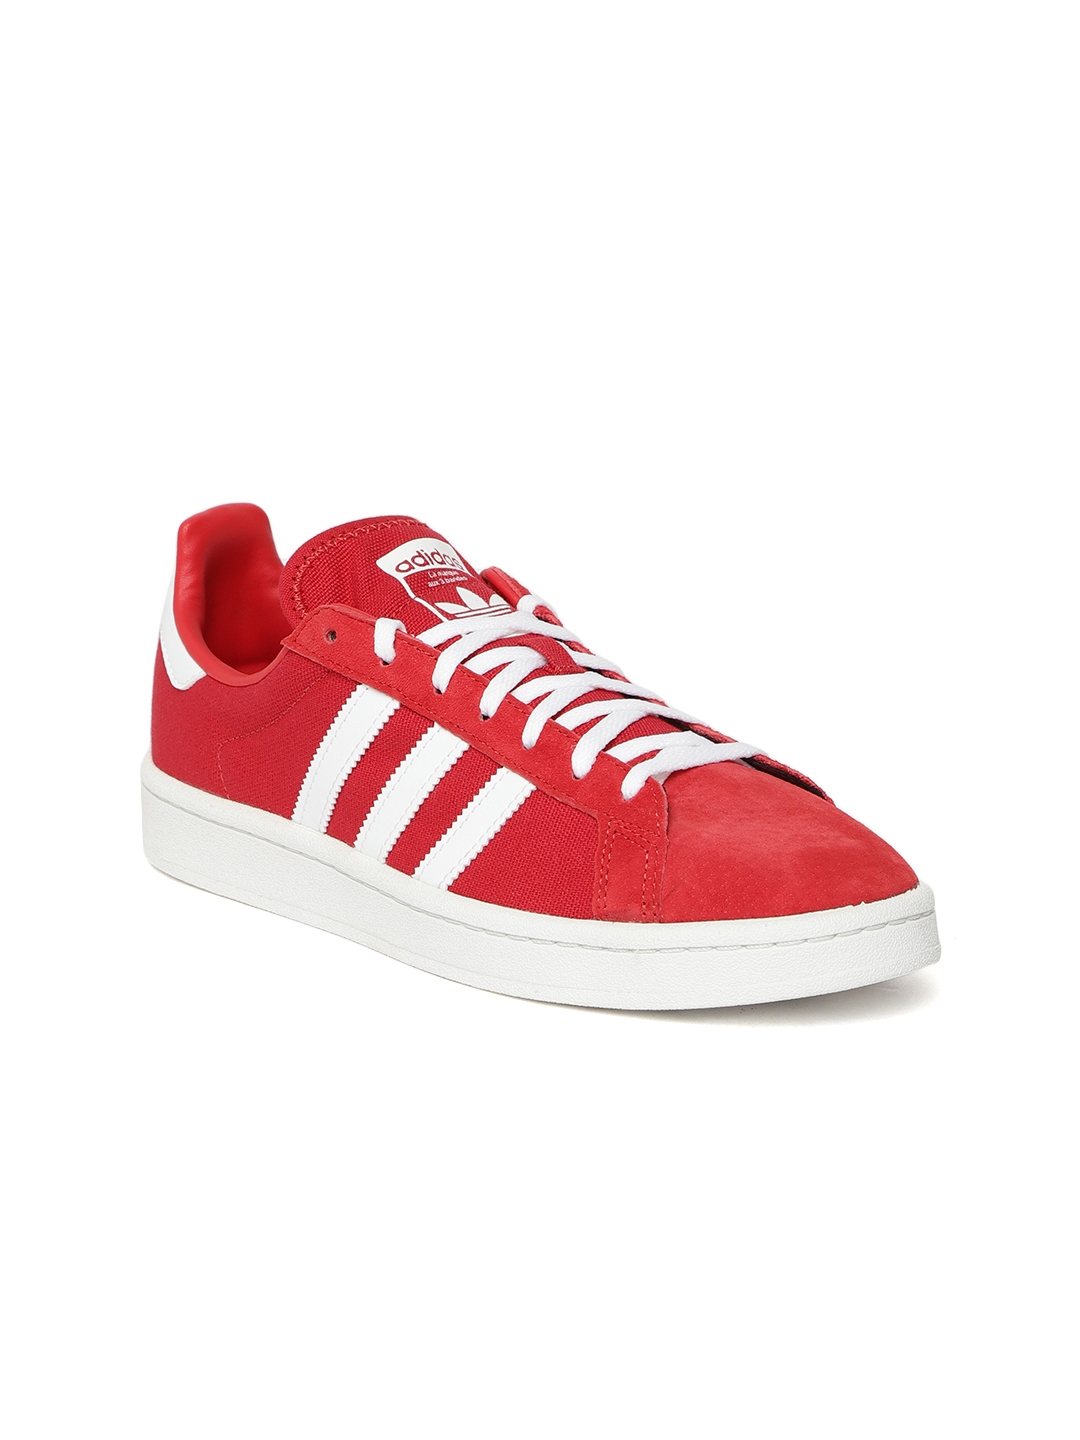 Buy ADIDAS Originals Women Red Campus Sneakers - Casual Shoes for Women ...